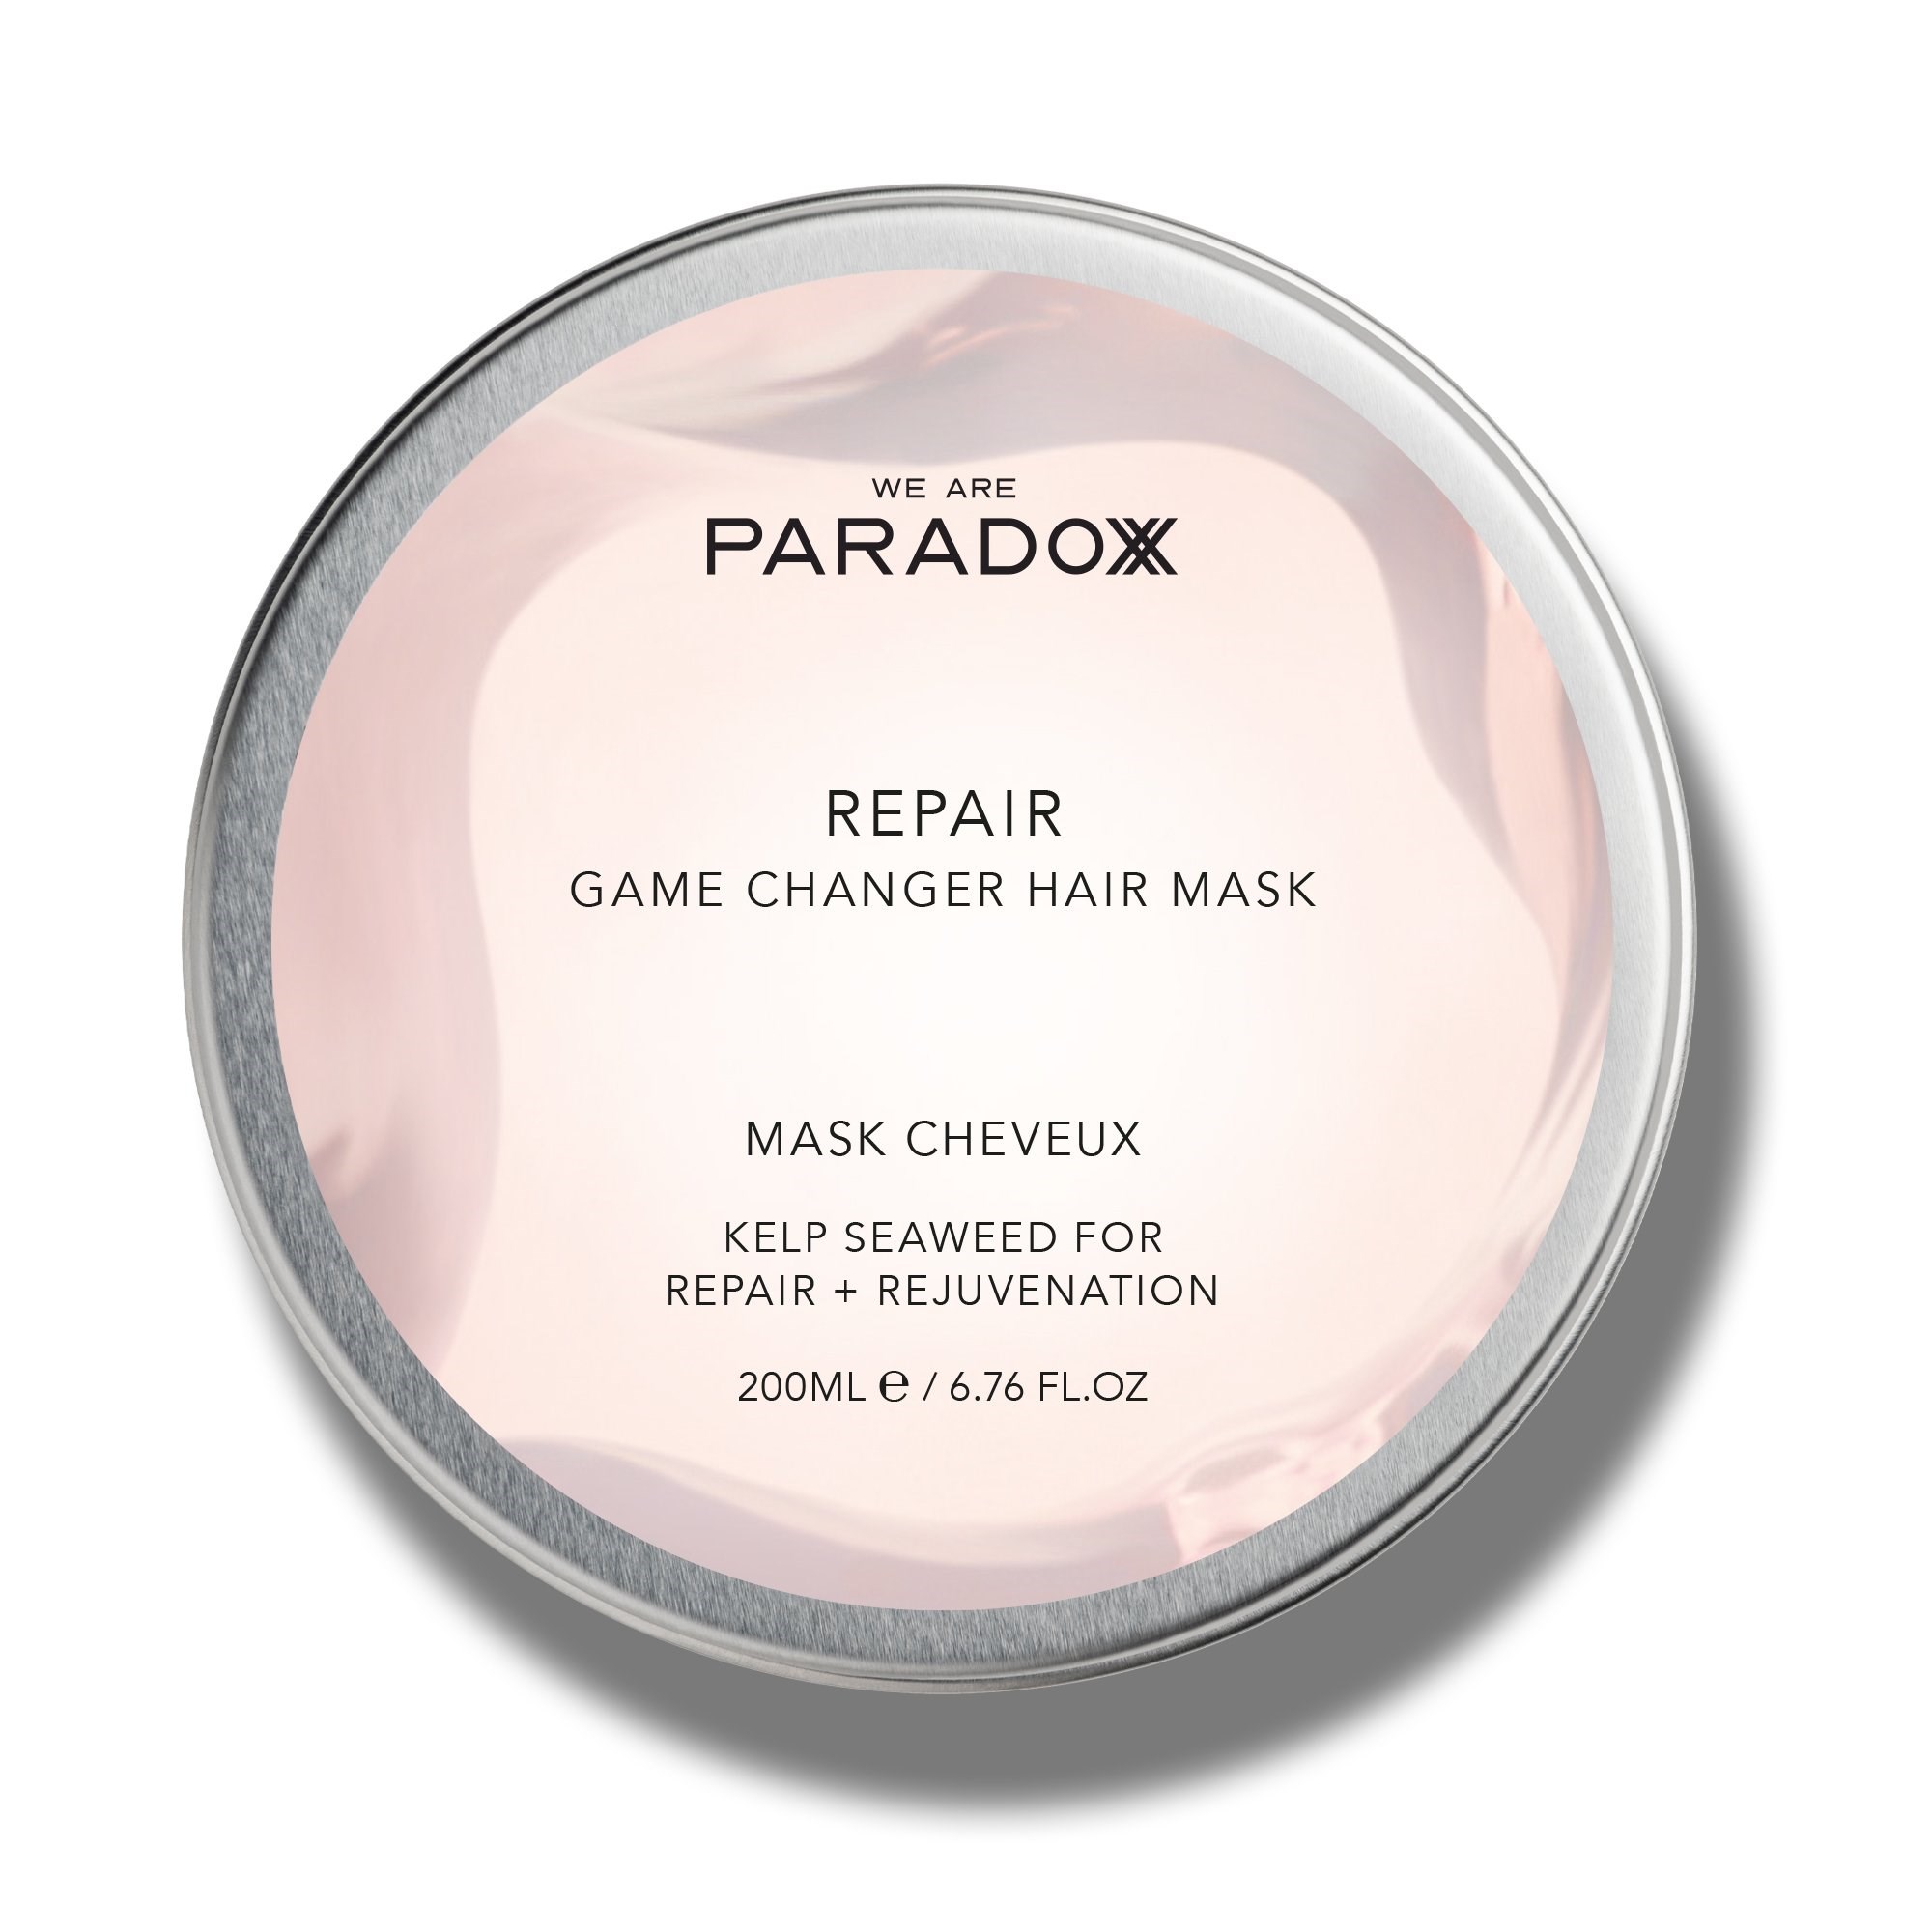 WE ARE PARADOXX REPAIR GAME CHANGER HAIR MASK